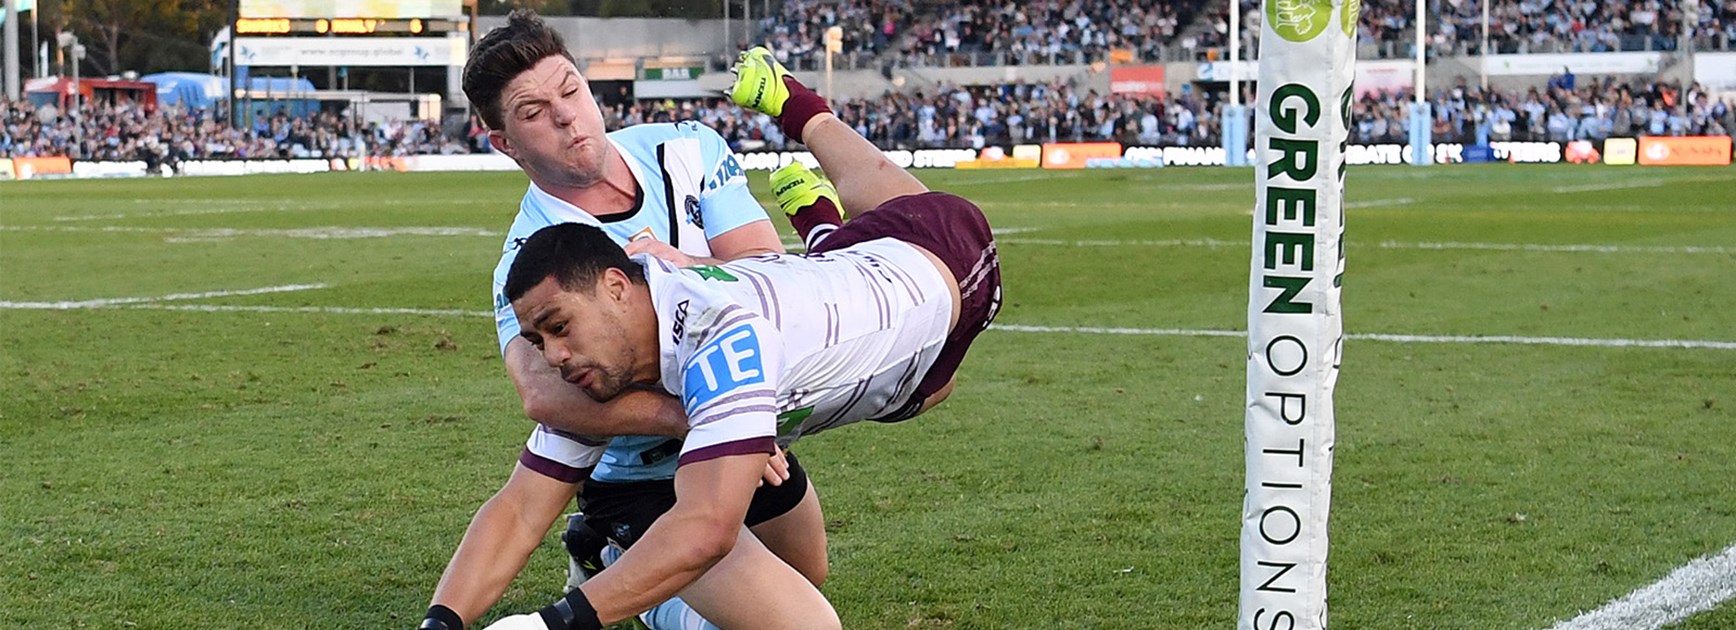 Origin on cards as DCE inspires Manly win 